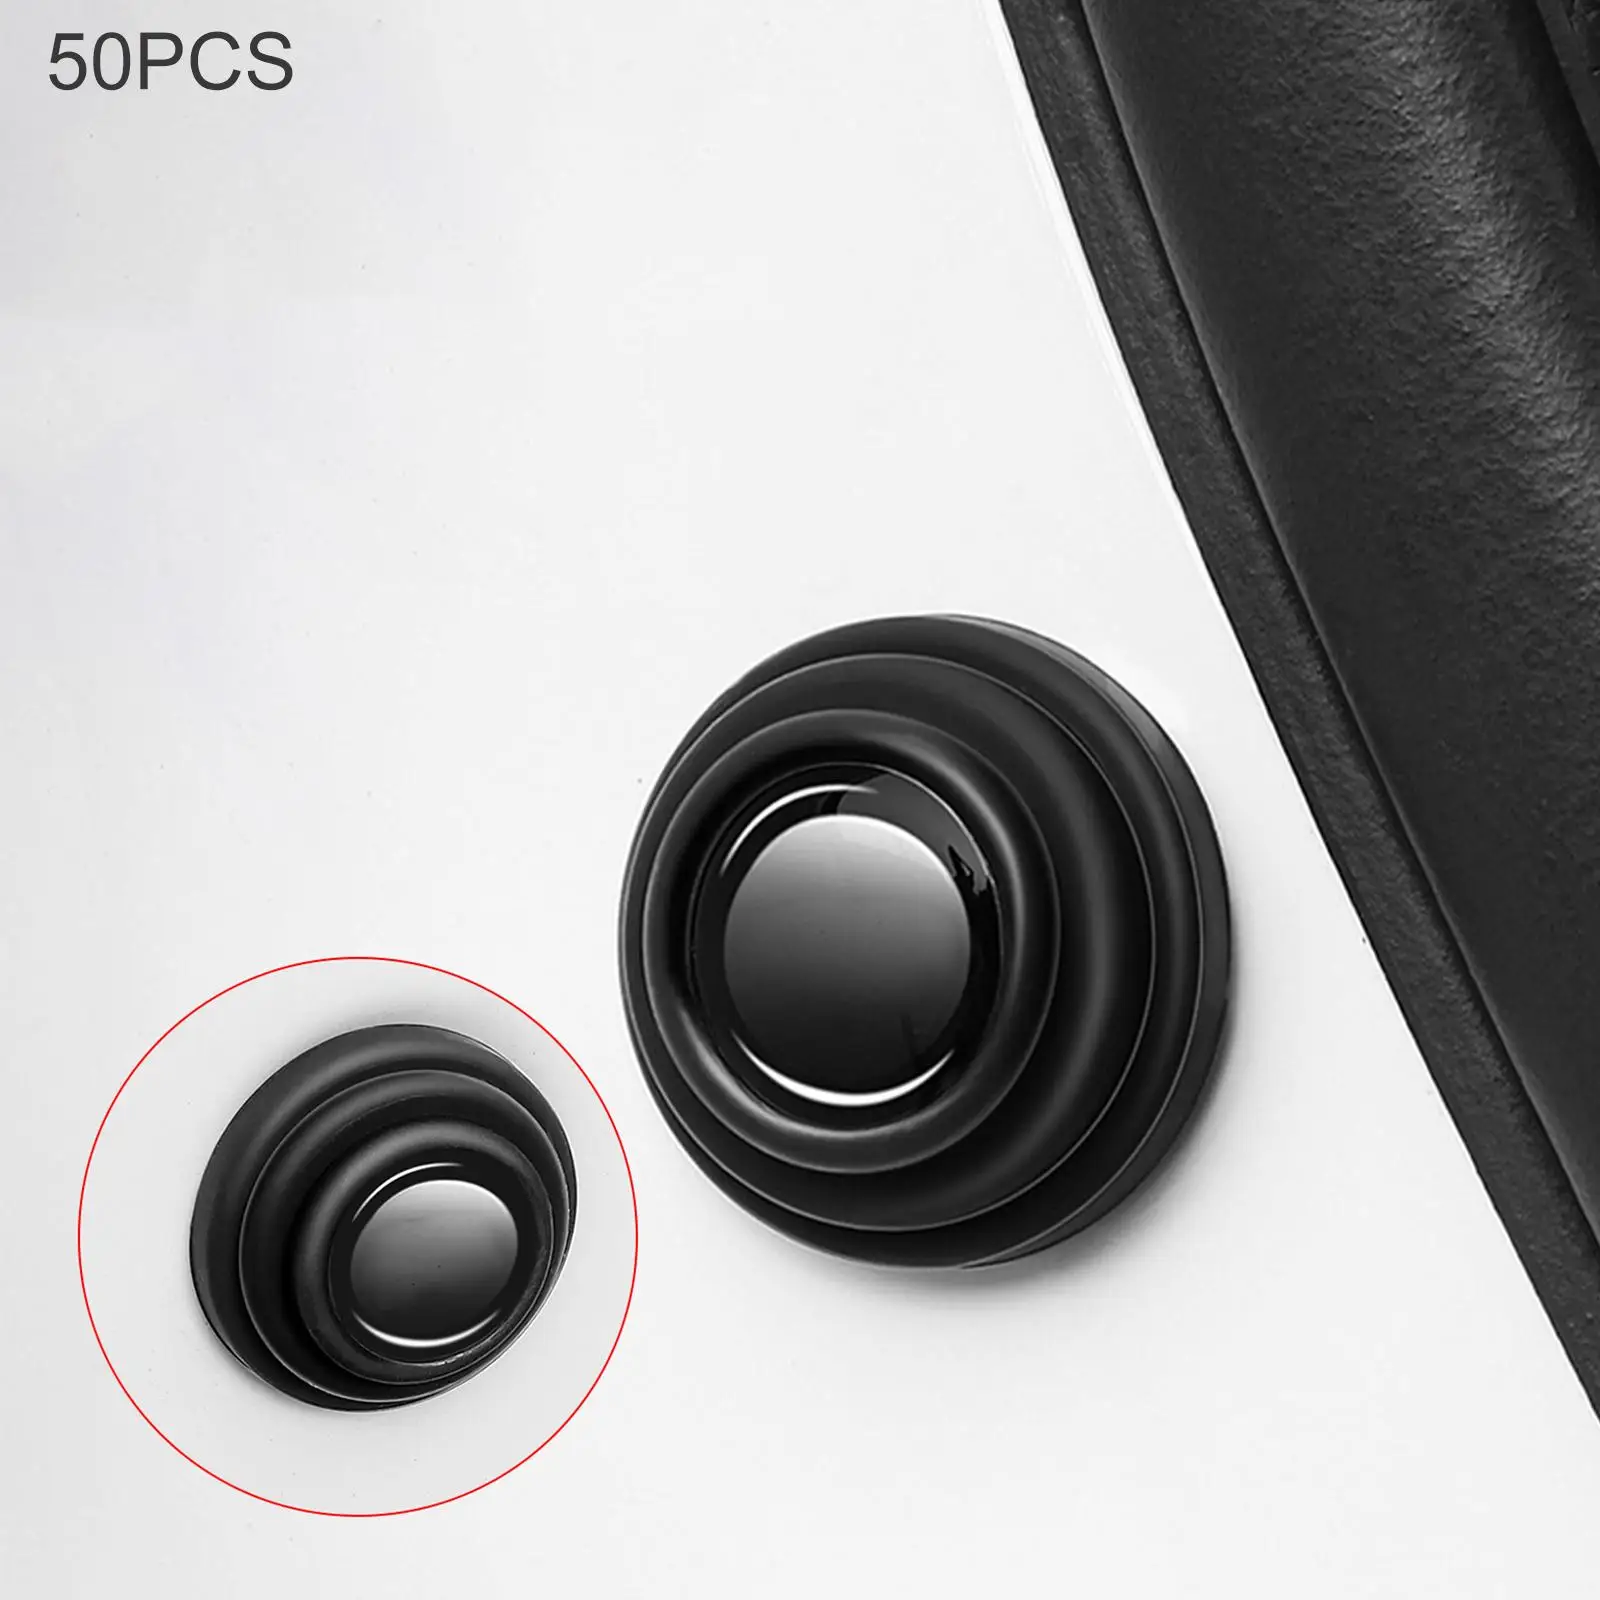 50Pcs Car Door Shock Absorber Gasket Guard  Cushion Protector Soundproof Stickers Shock Absorbing Anti Collision Accessories